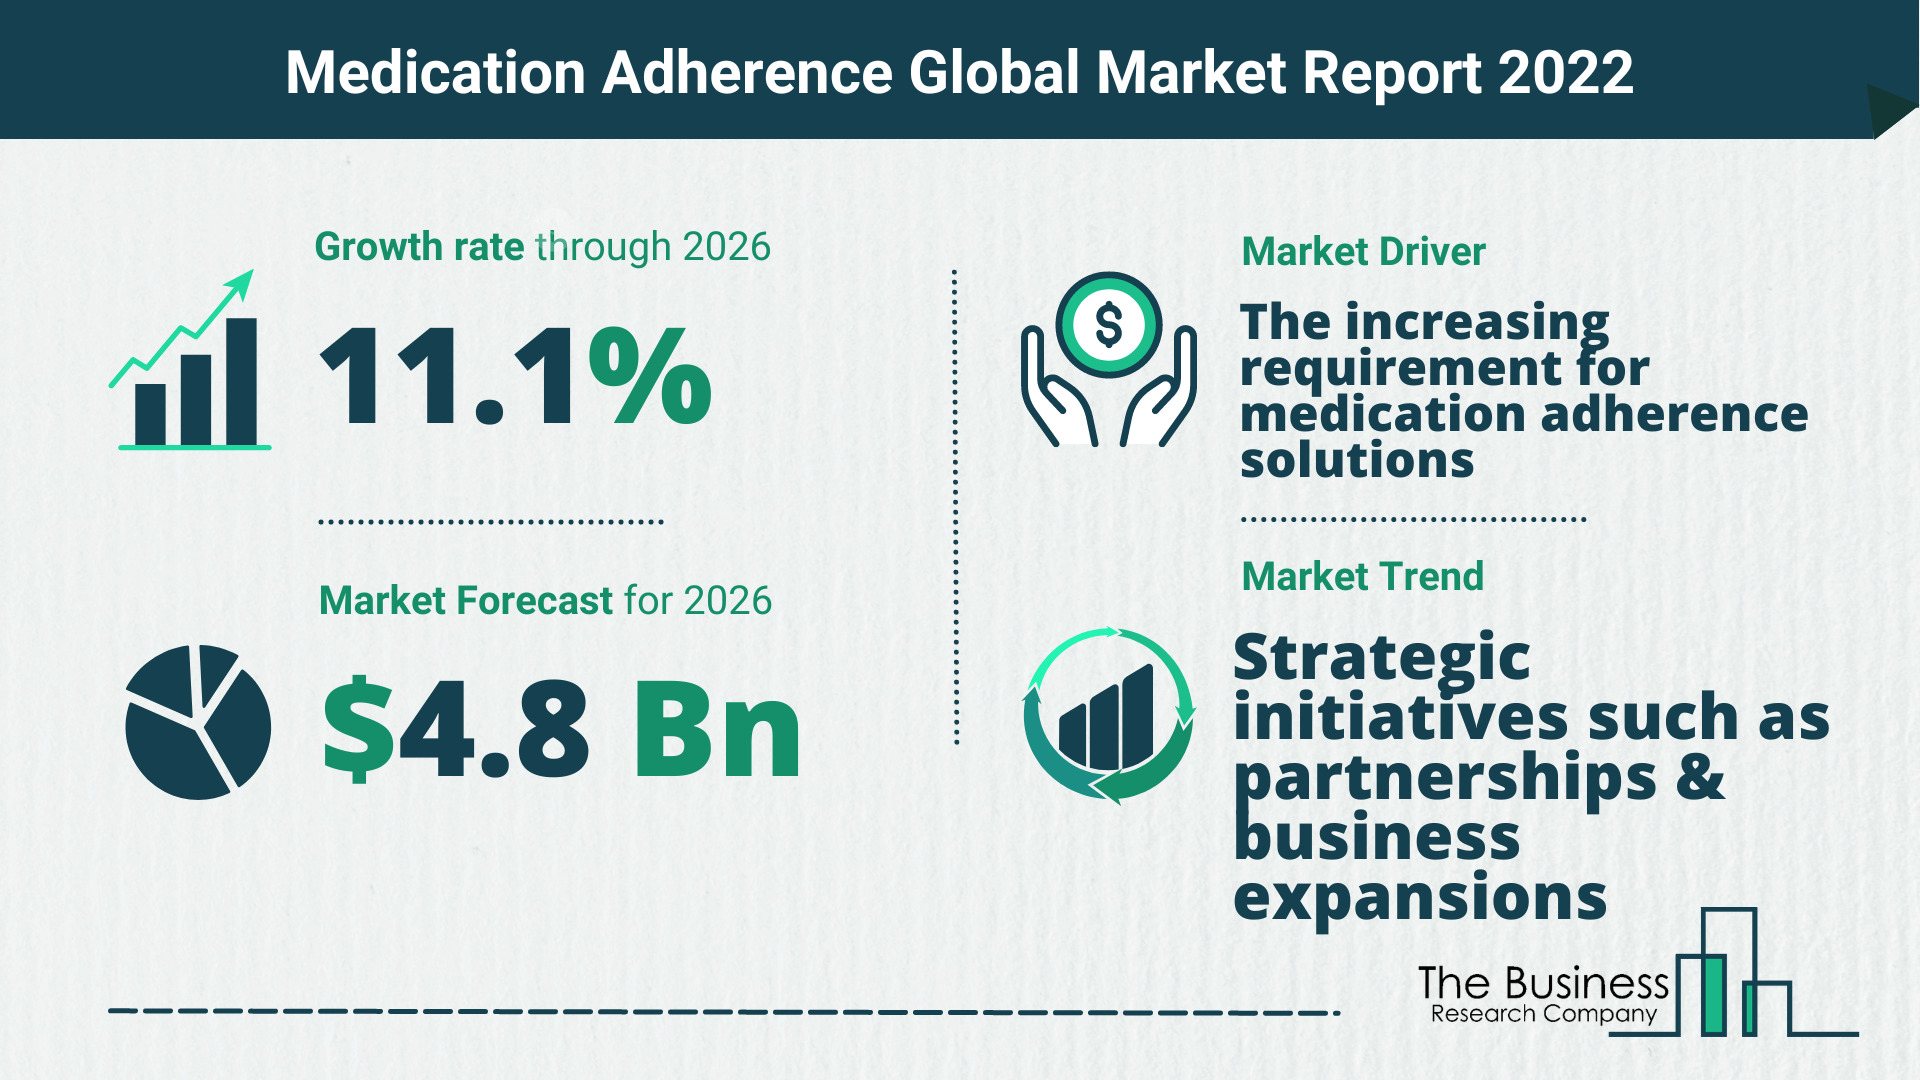 What Is The Medication Adherence Market Overview In 2022?